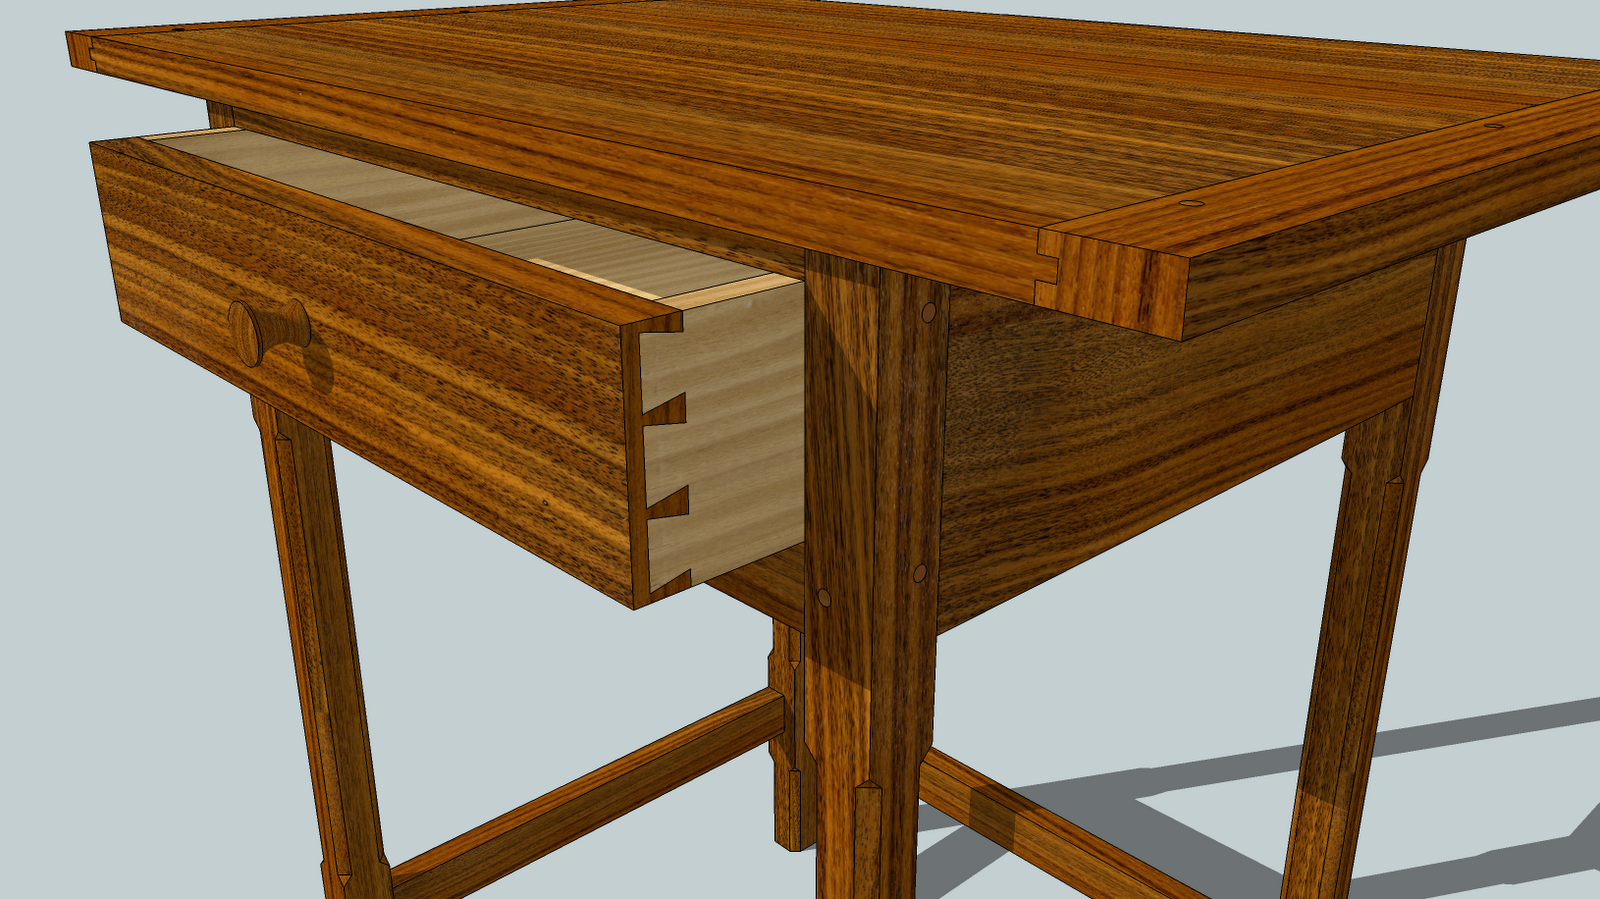 Woodworking woodworking sketchup PDF Free Download